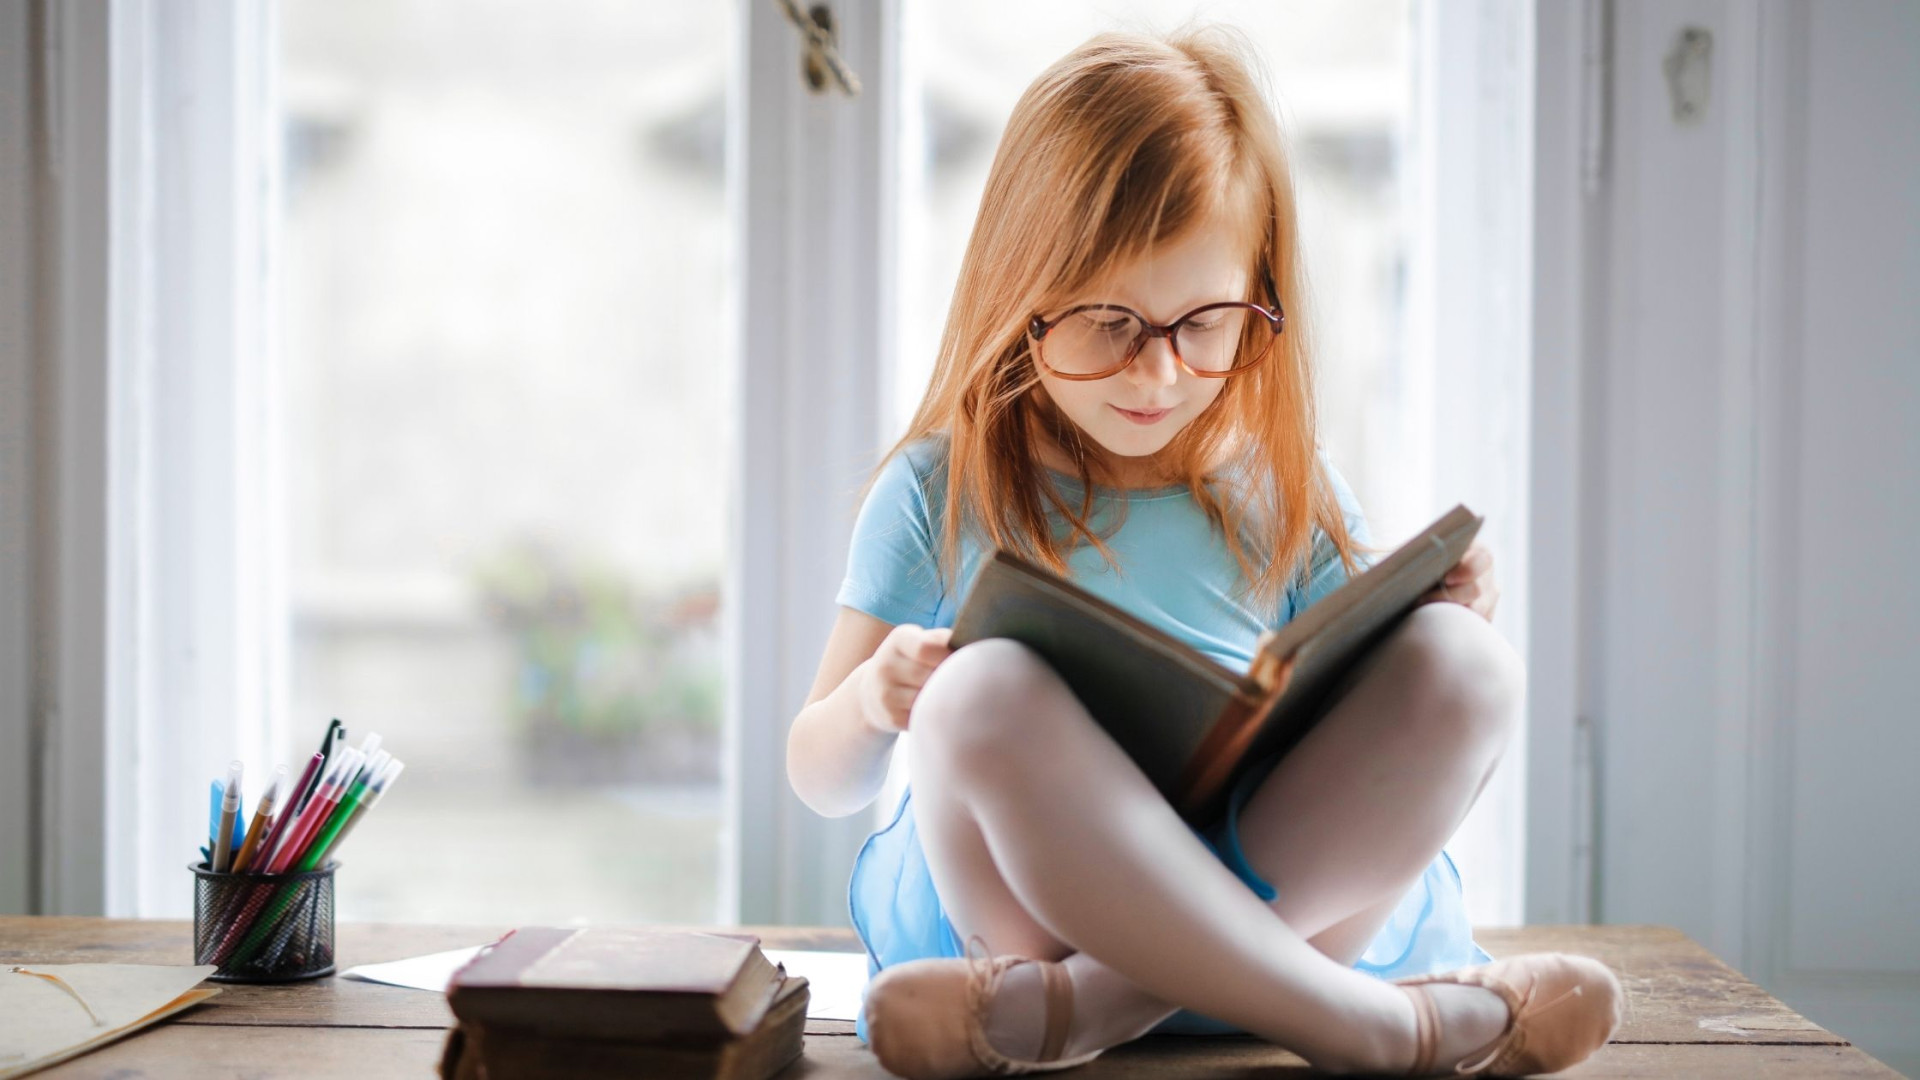 Small girl wearing glasses sitting in a sunny window reading a book